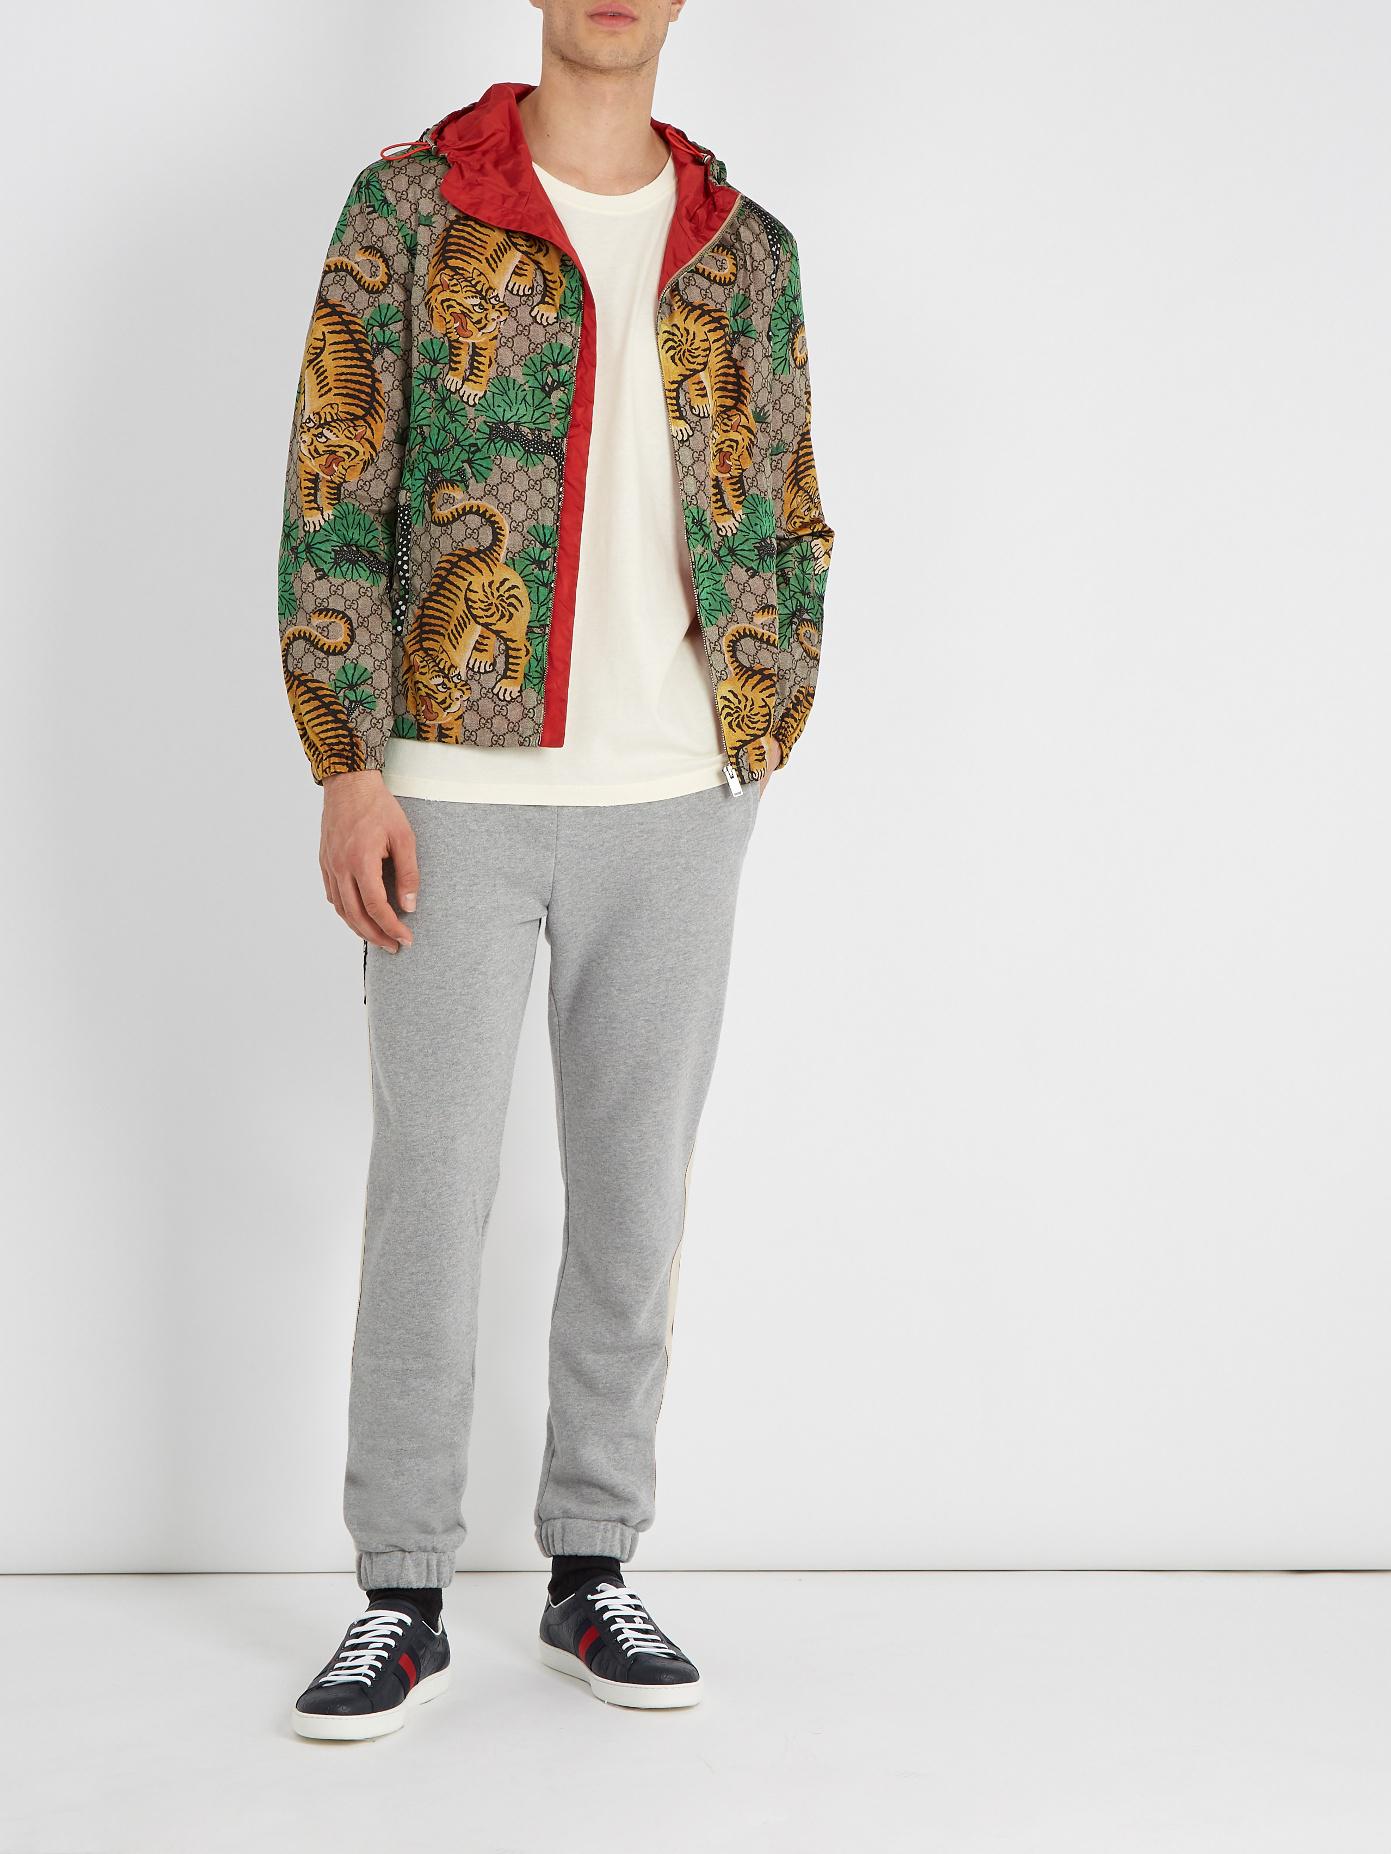 Gucci Synthetic Bengal Tiger Print Jacket in Green for Men - Lyst